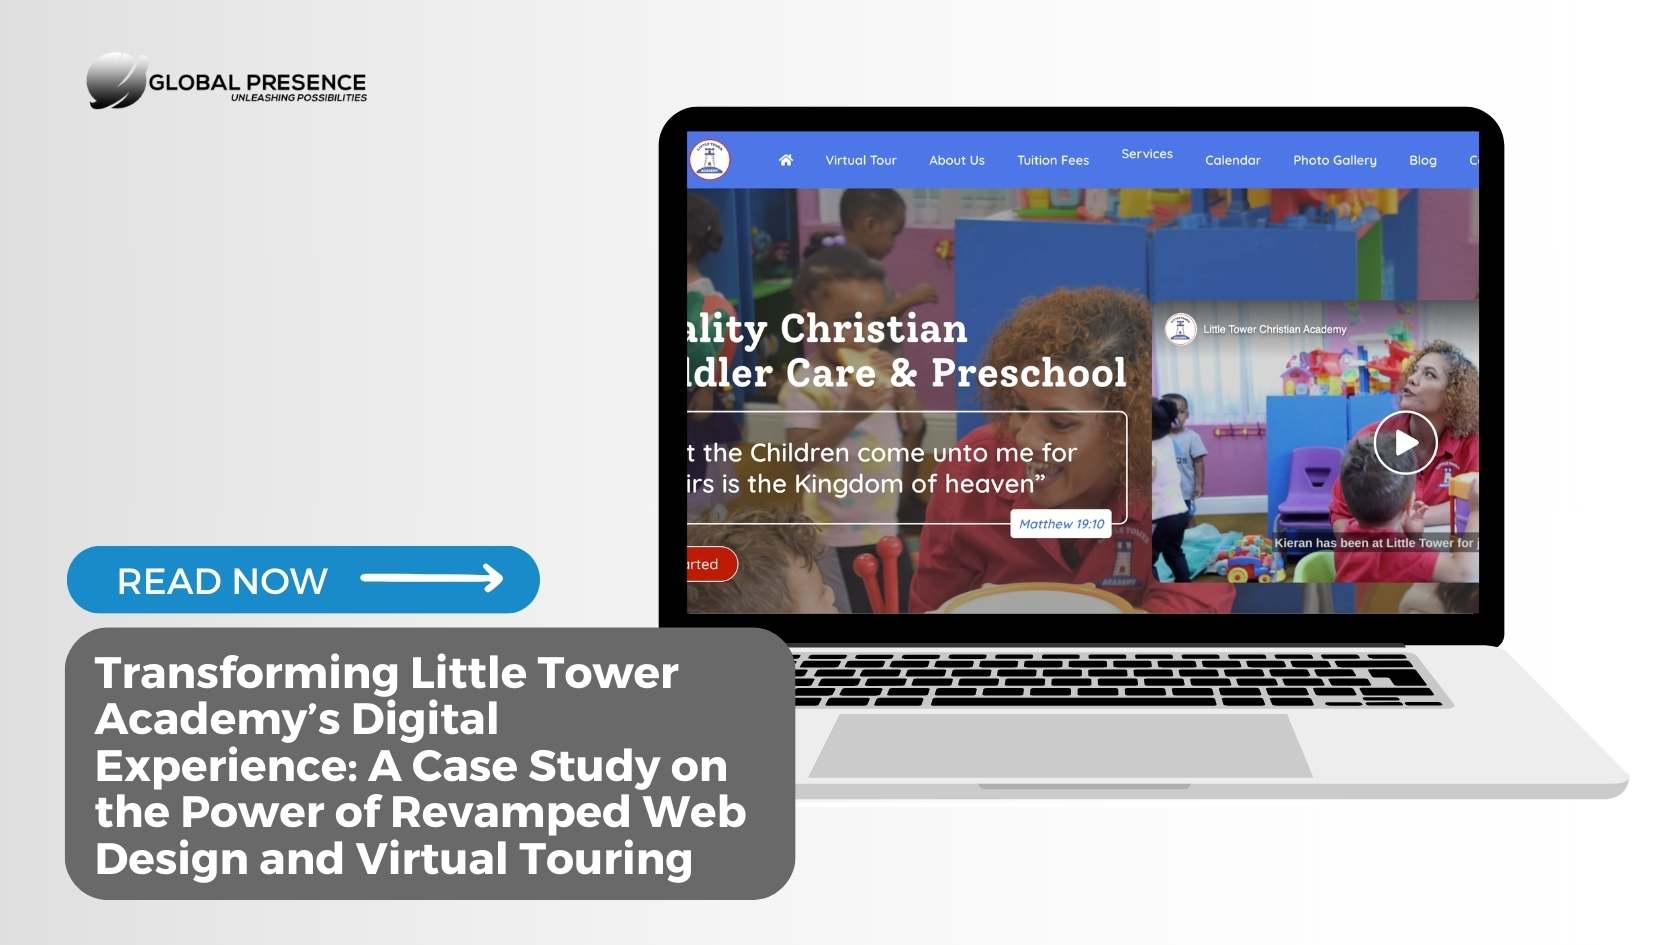 Transforming Little Tower Academy’s Digital Experience: A Case Study on the Power of Revamped Web Design and Virtual Touring